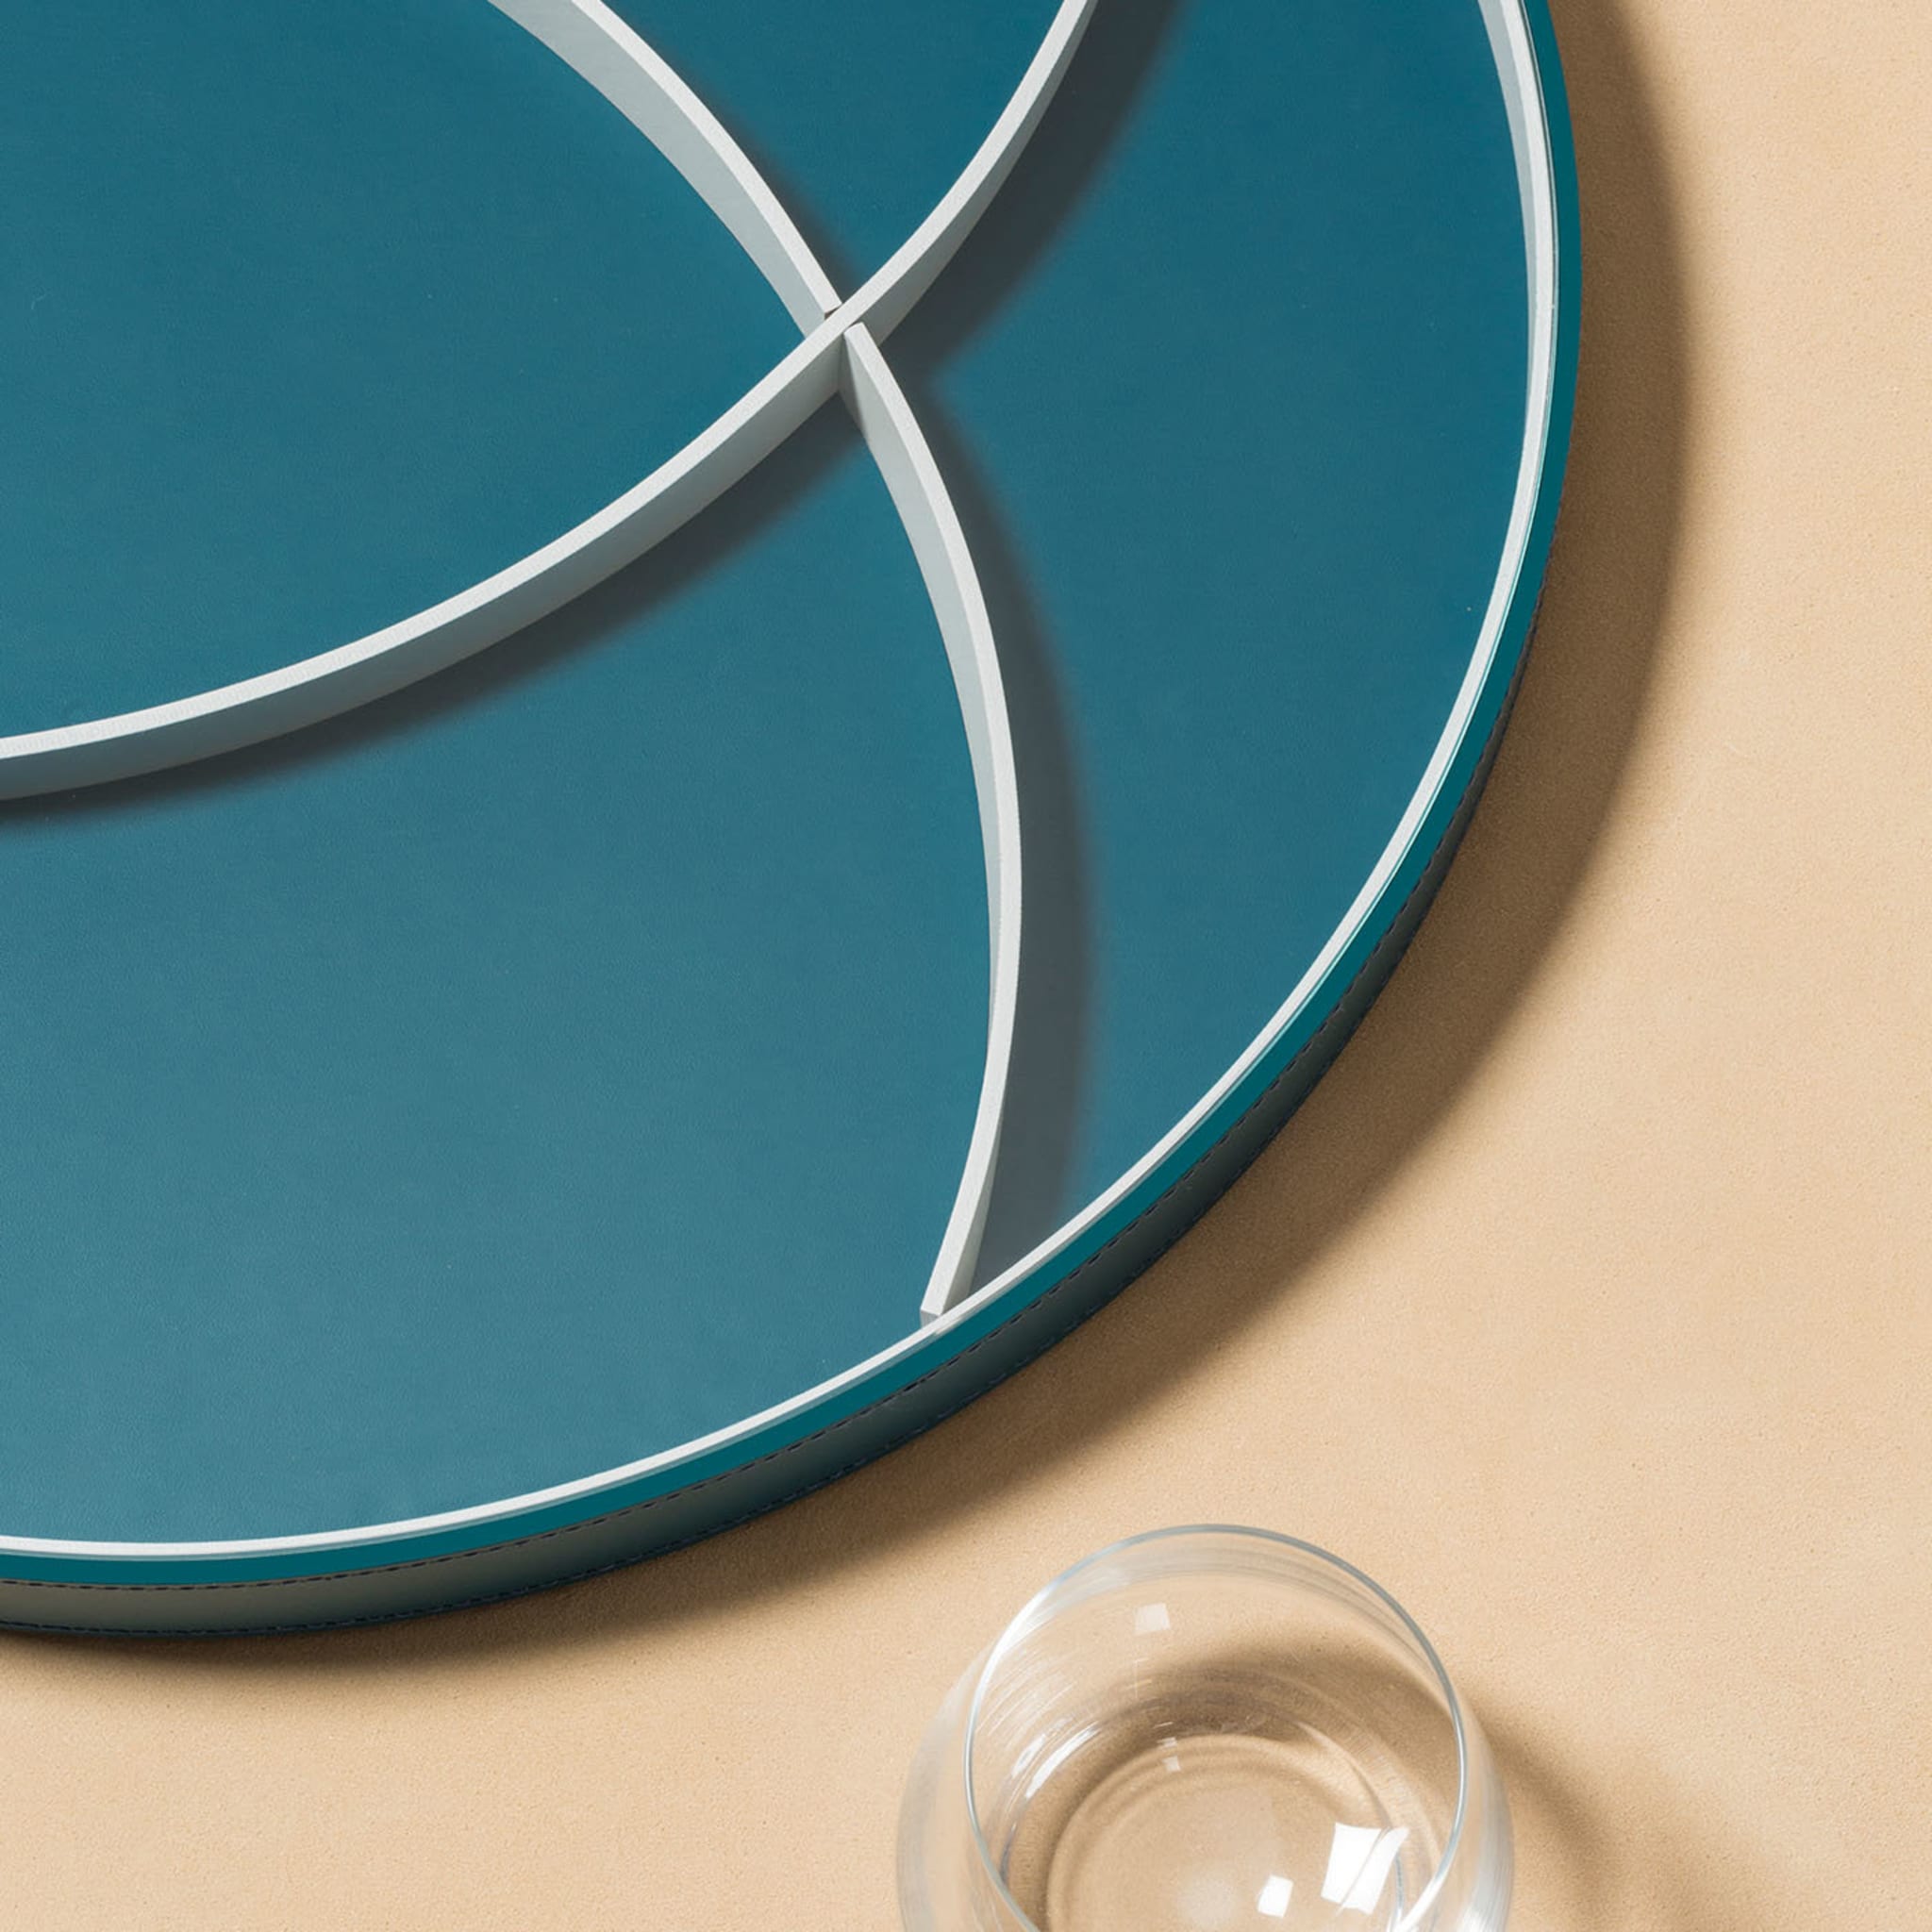 Orbit Petrol Blue Round Tray N. 3 with Dividers - Alternative view 2